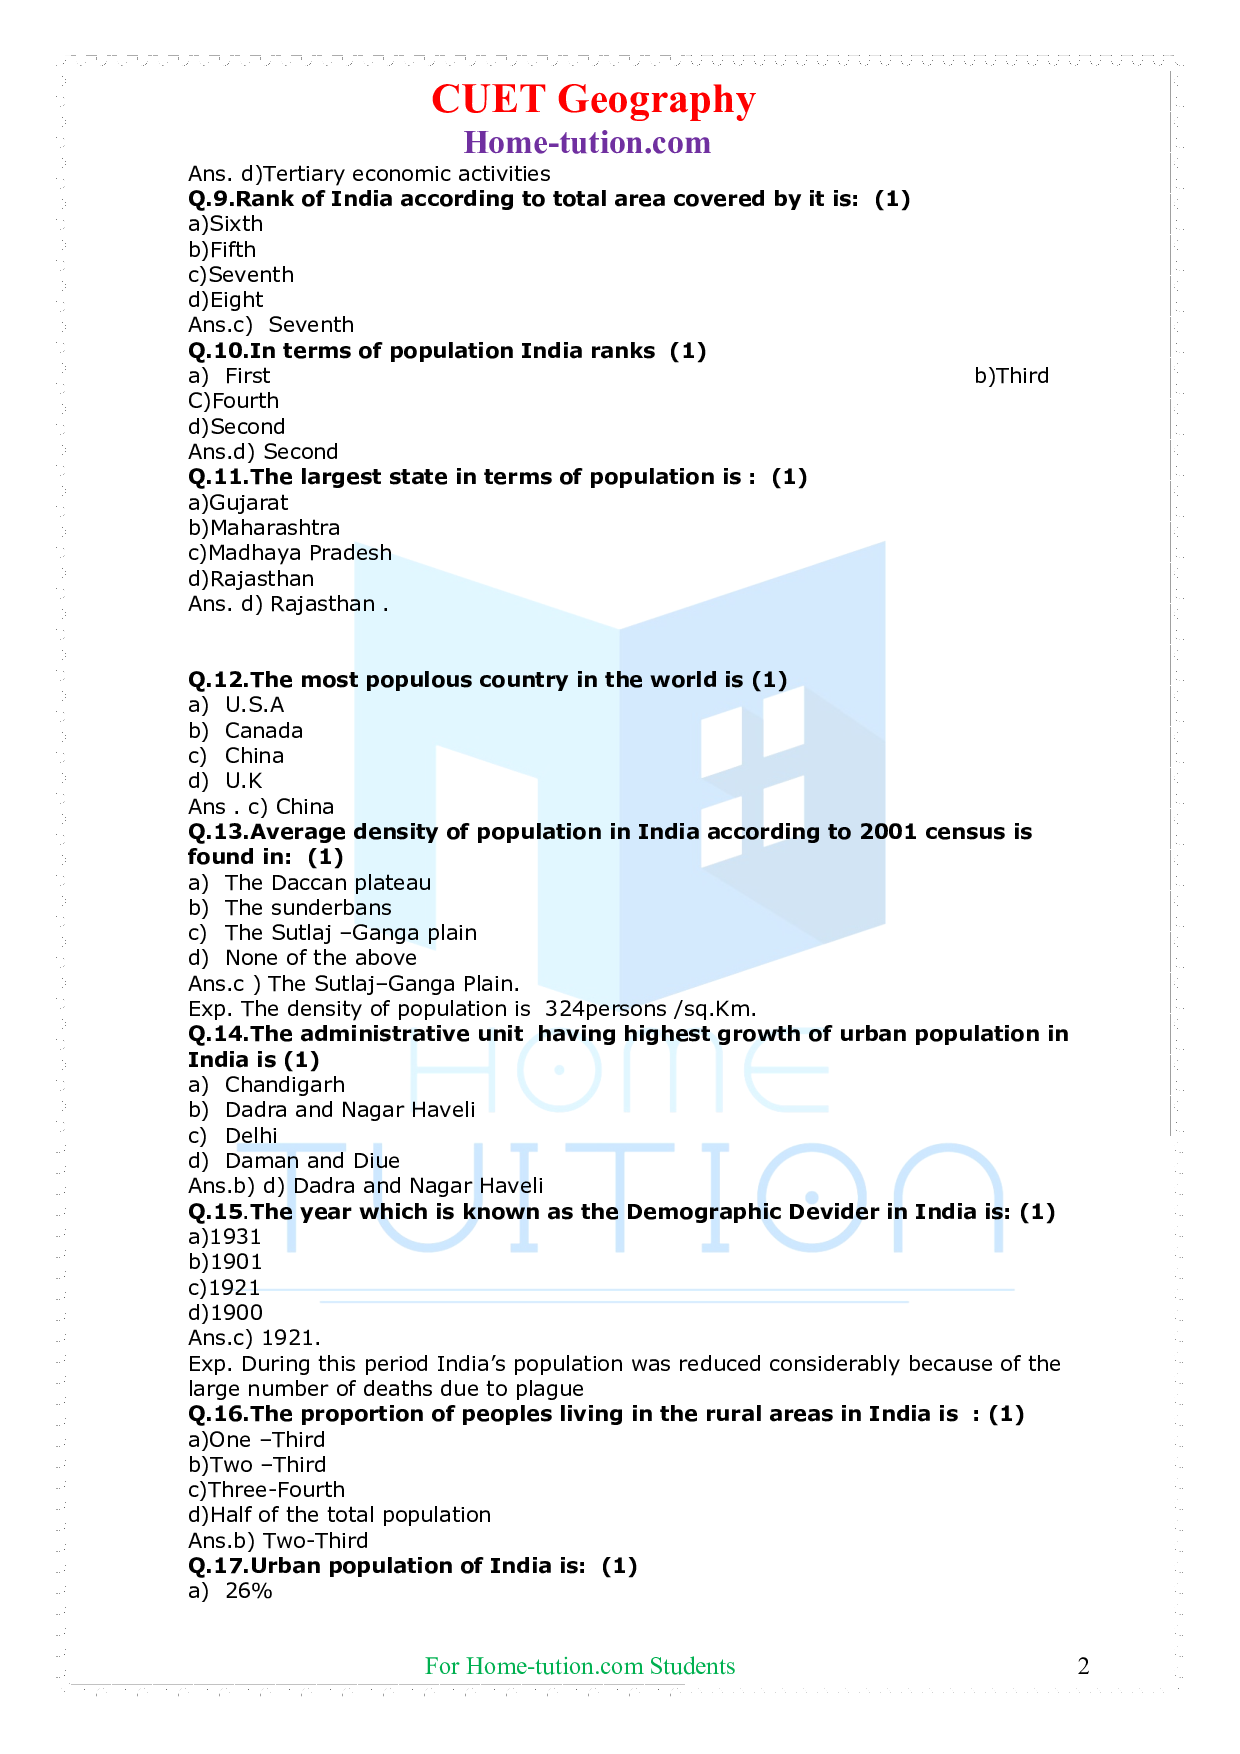 CUET Geography India People and Economy Chapter 1 Population: Distribution, Density, Growth and Composition